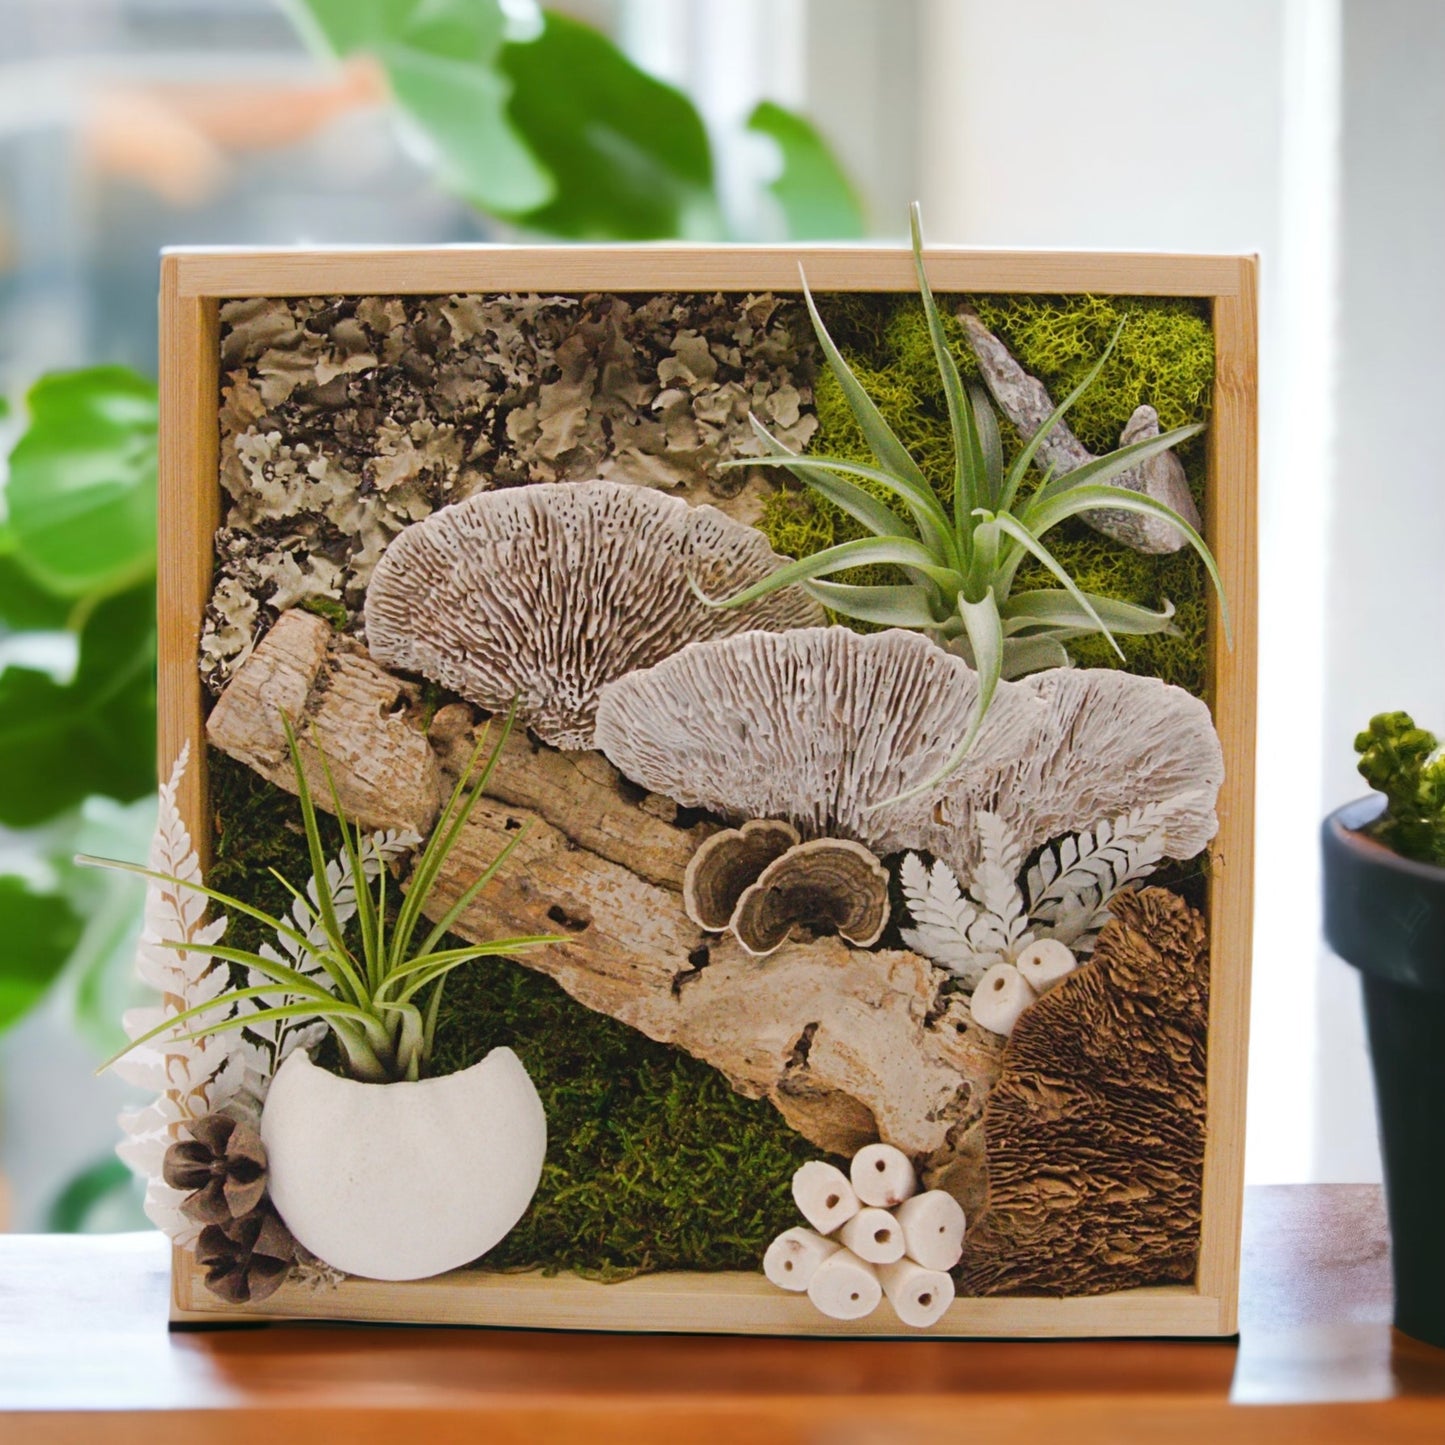 Bamboo box frame filled with moss, preserved mushrooms, wood and two airplants